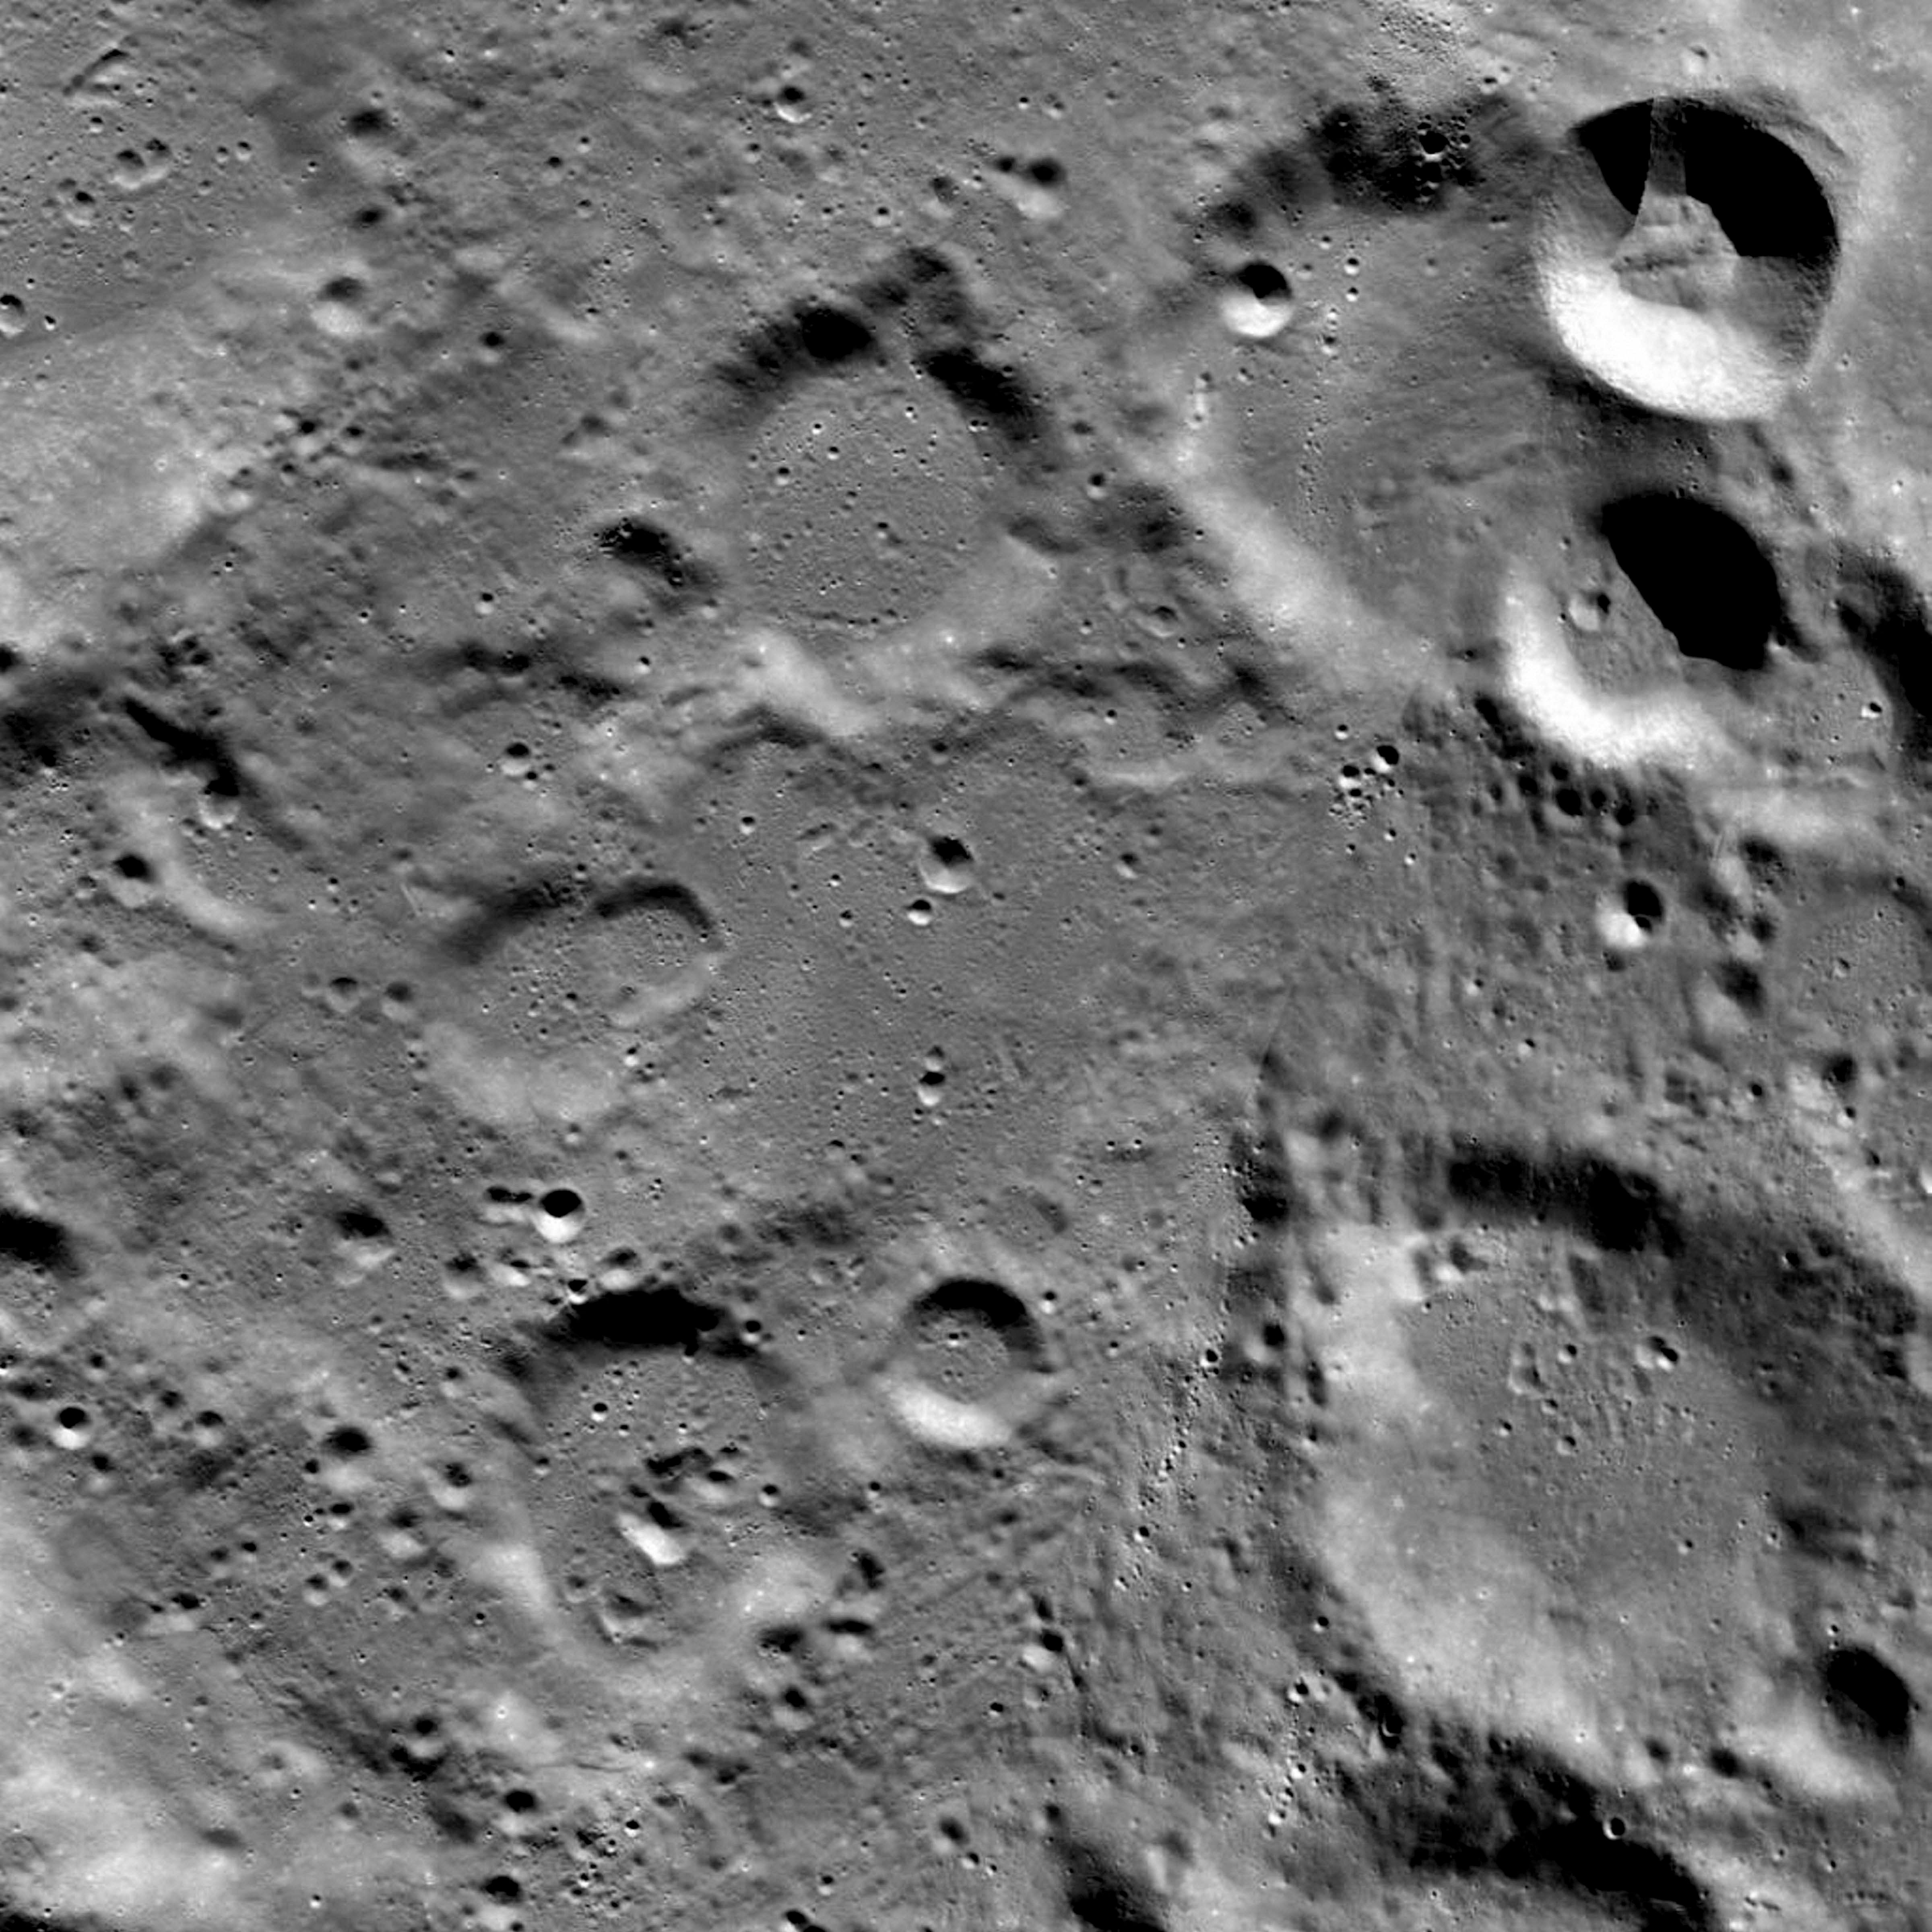 Surface of the moon. Credit: PTI Photo